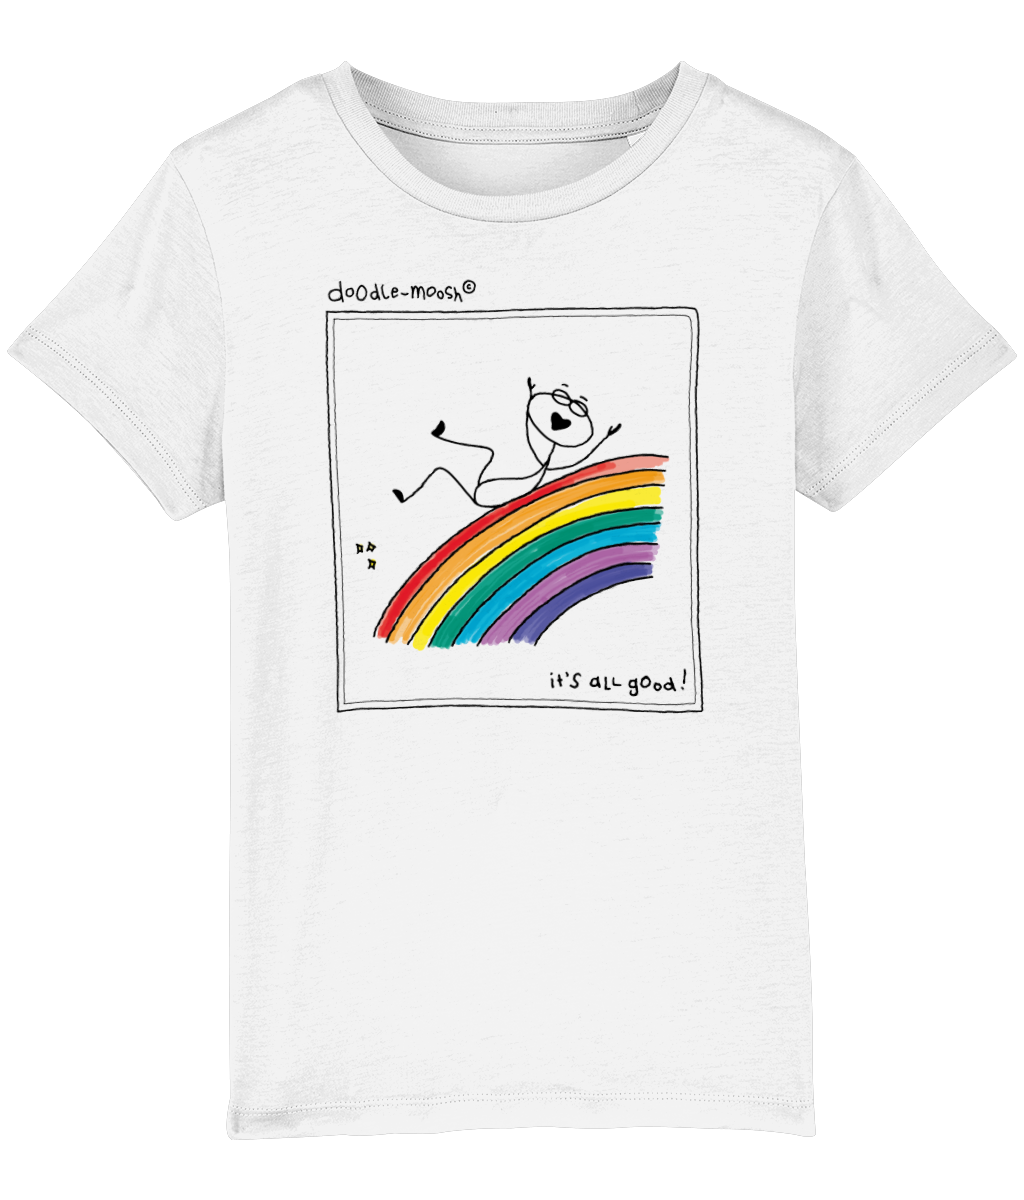 it's all good t-shirt, white with black, colored rainbow